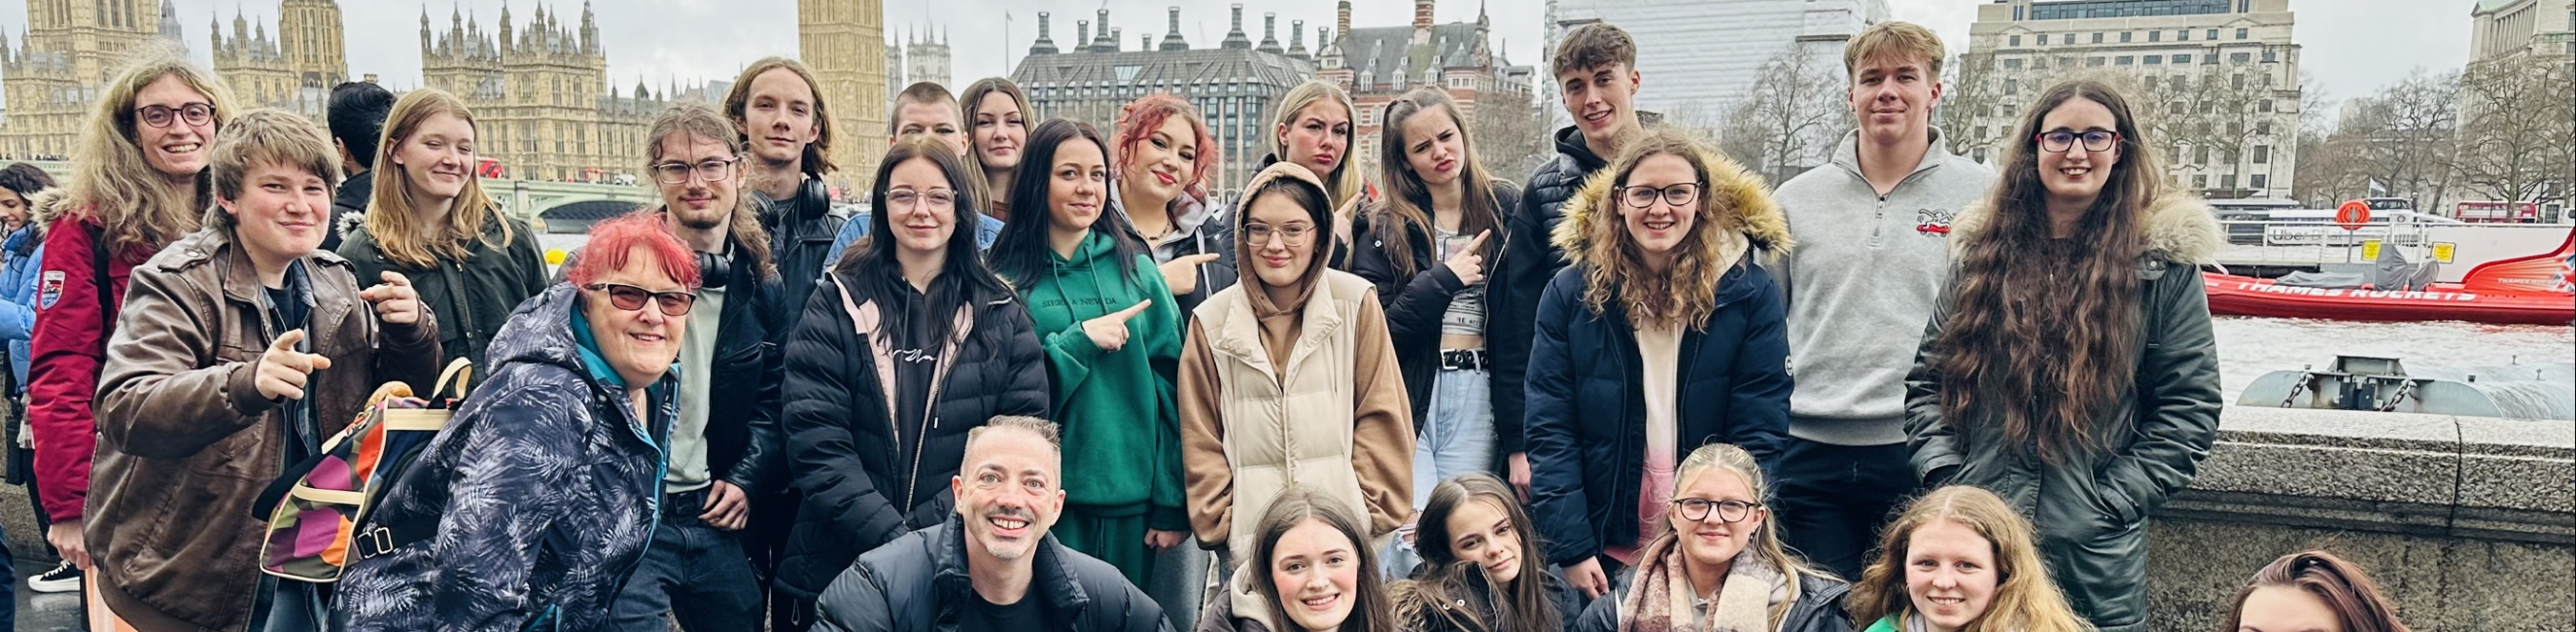 Performing arts students and teachers posing in front of the thames river, parliament and the big ben in London